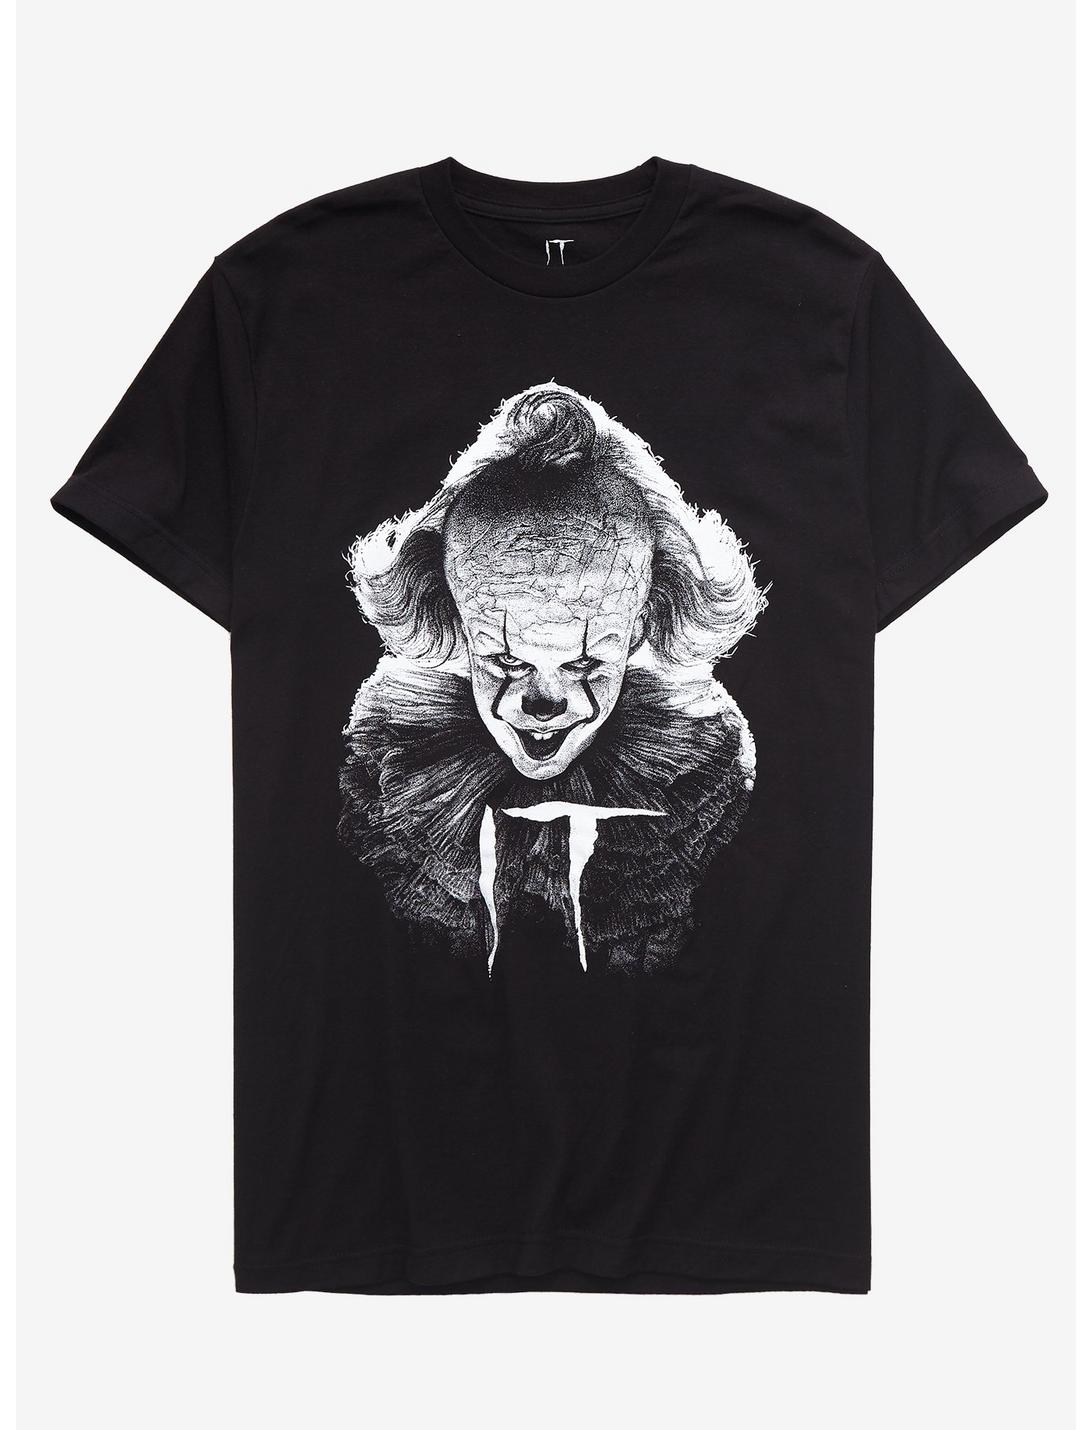 IT Pennywise Losers Club Two-Sided T-Shirt, BLACK, hi-res